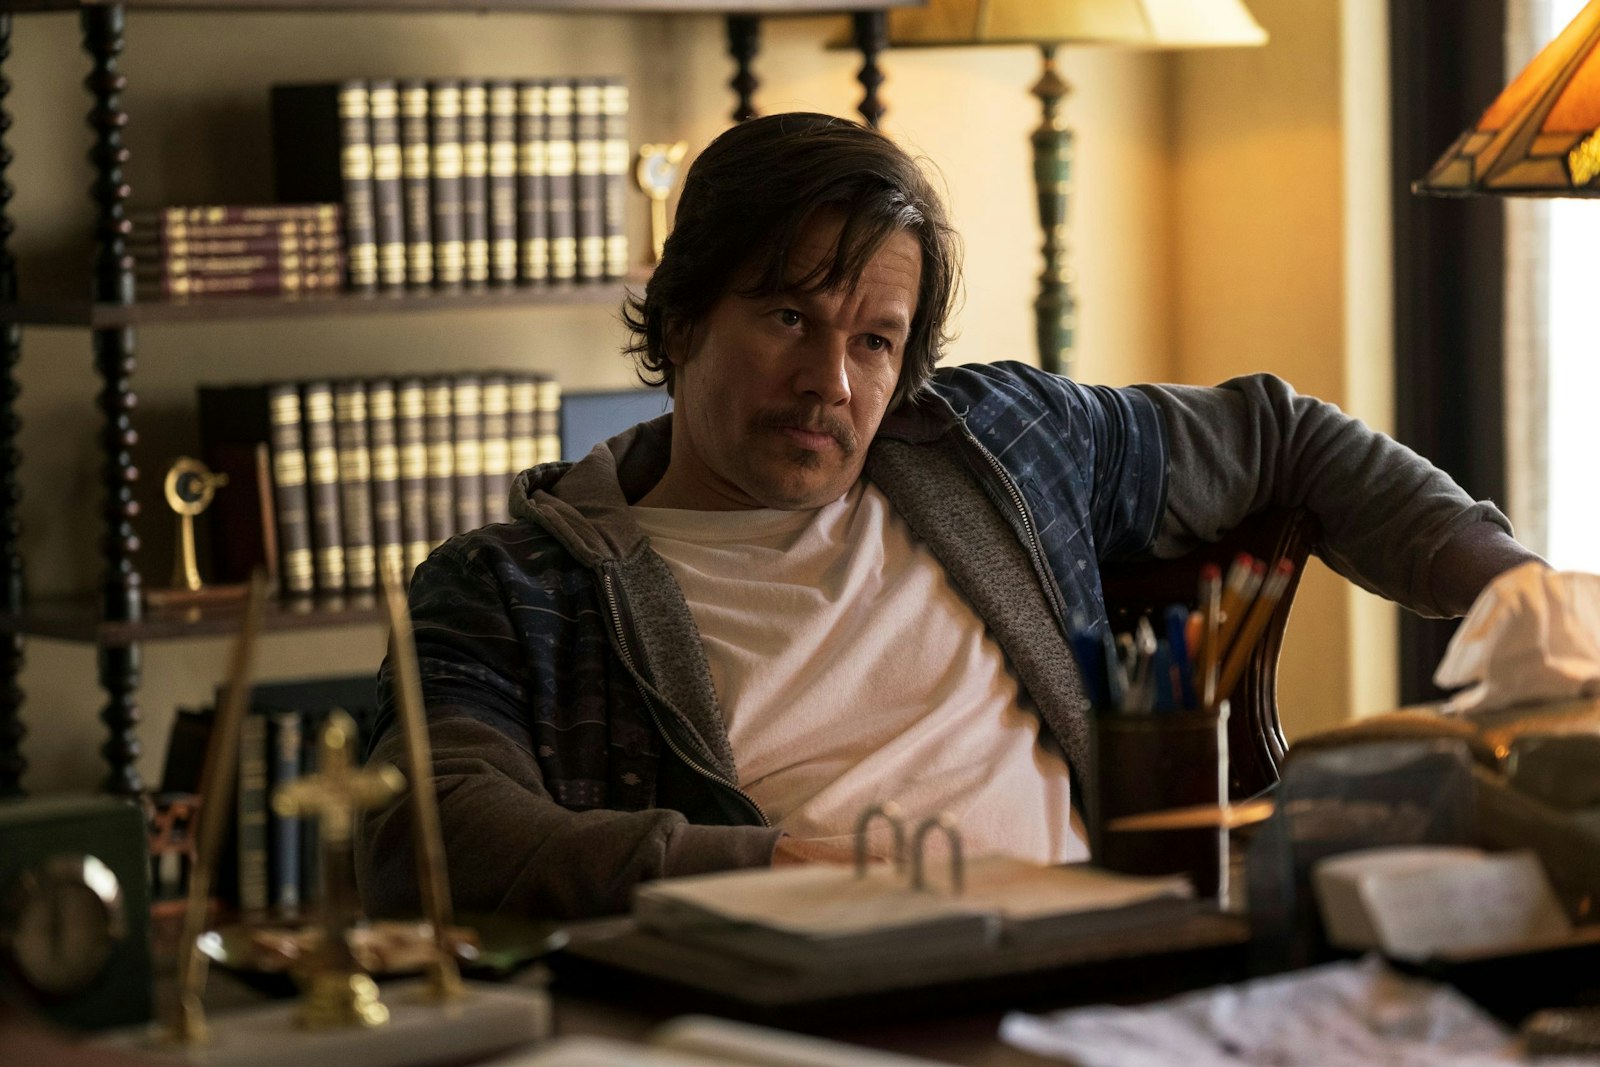 Wahlberg's portrayal of Stuart Long, the titular character who would go on to priesthood, is a passion project he says he's been working on for years. Gritty and unrefined, Long's life takes many twists and turns before finding himself following the Lord's call to priesthood, not as an end in itself, but as a mile marker of grace in a still-imperfect life.